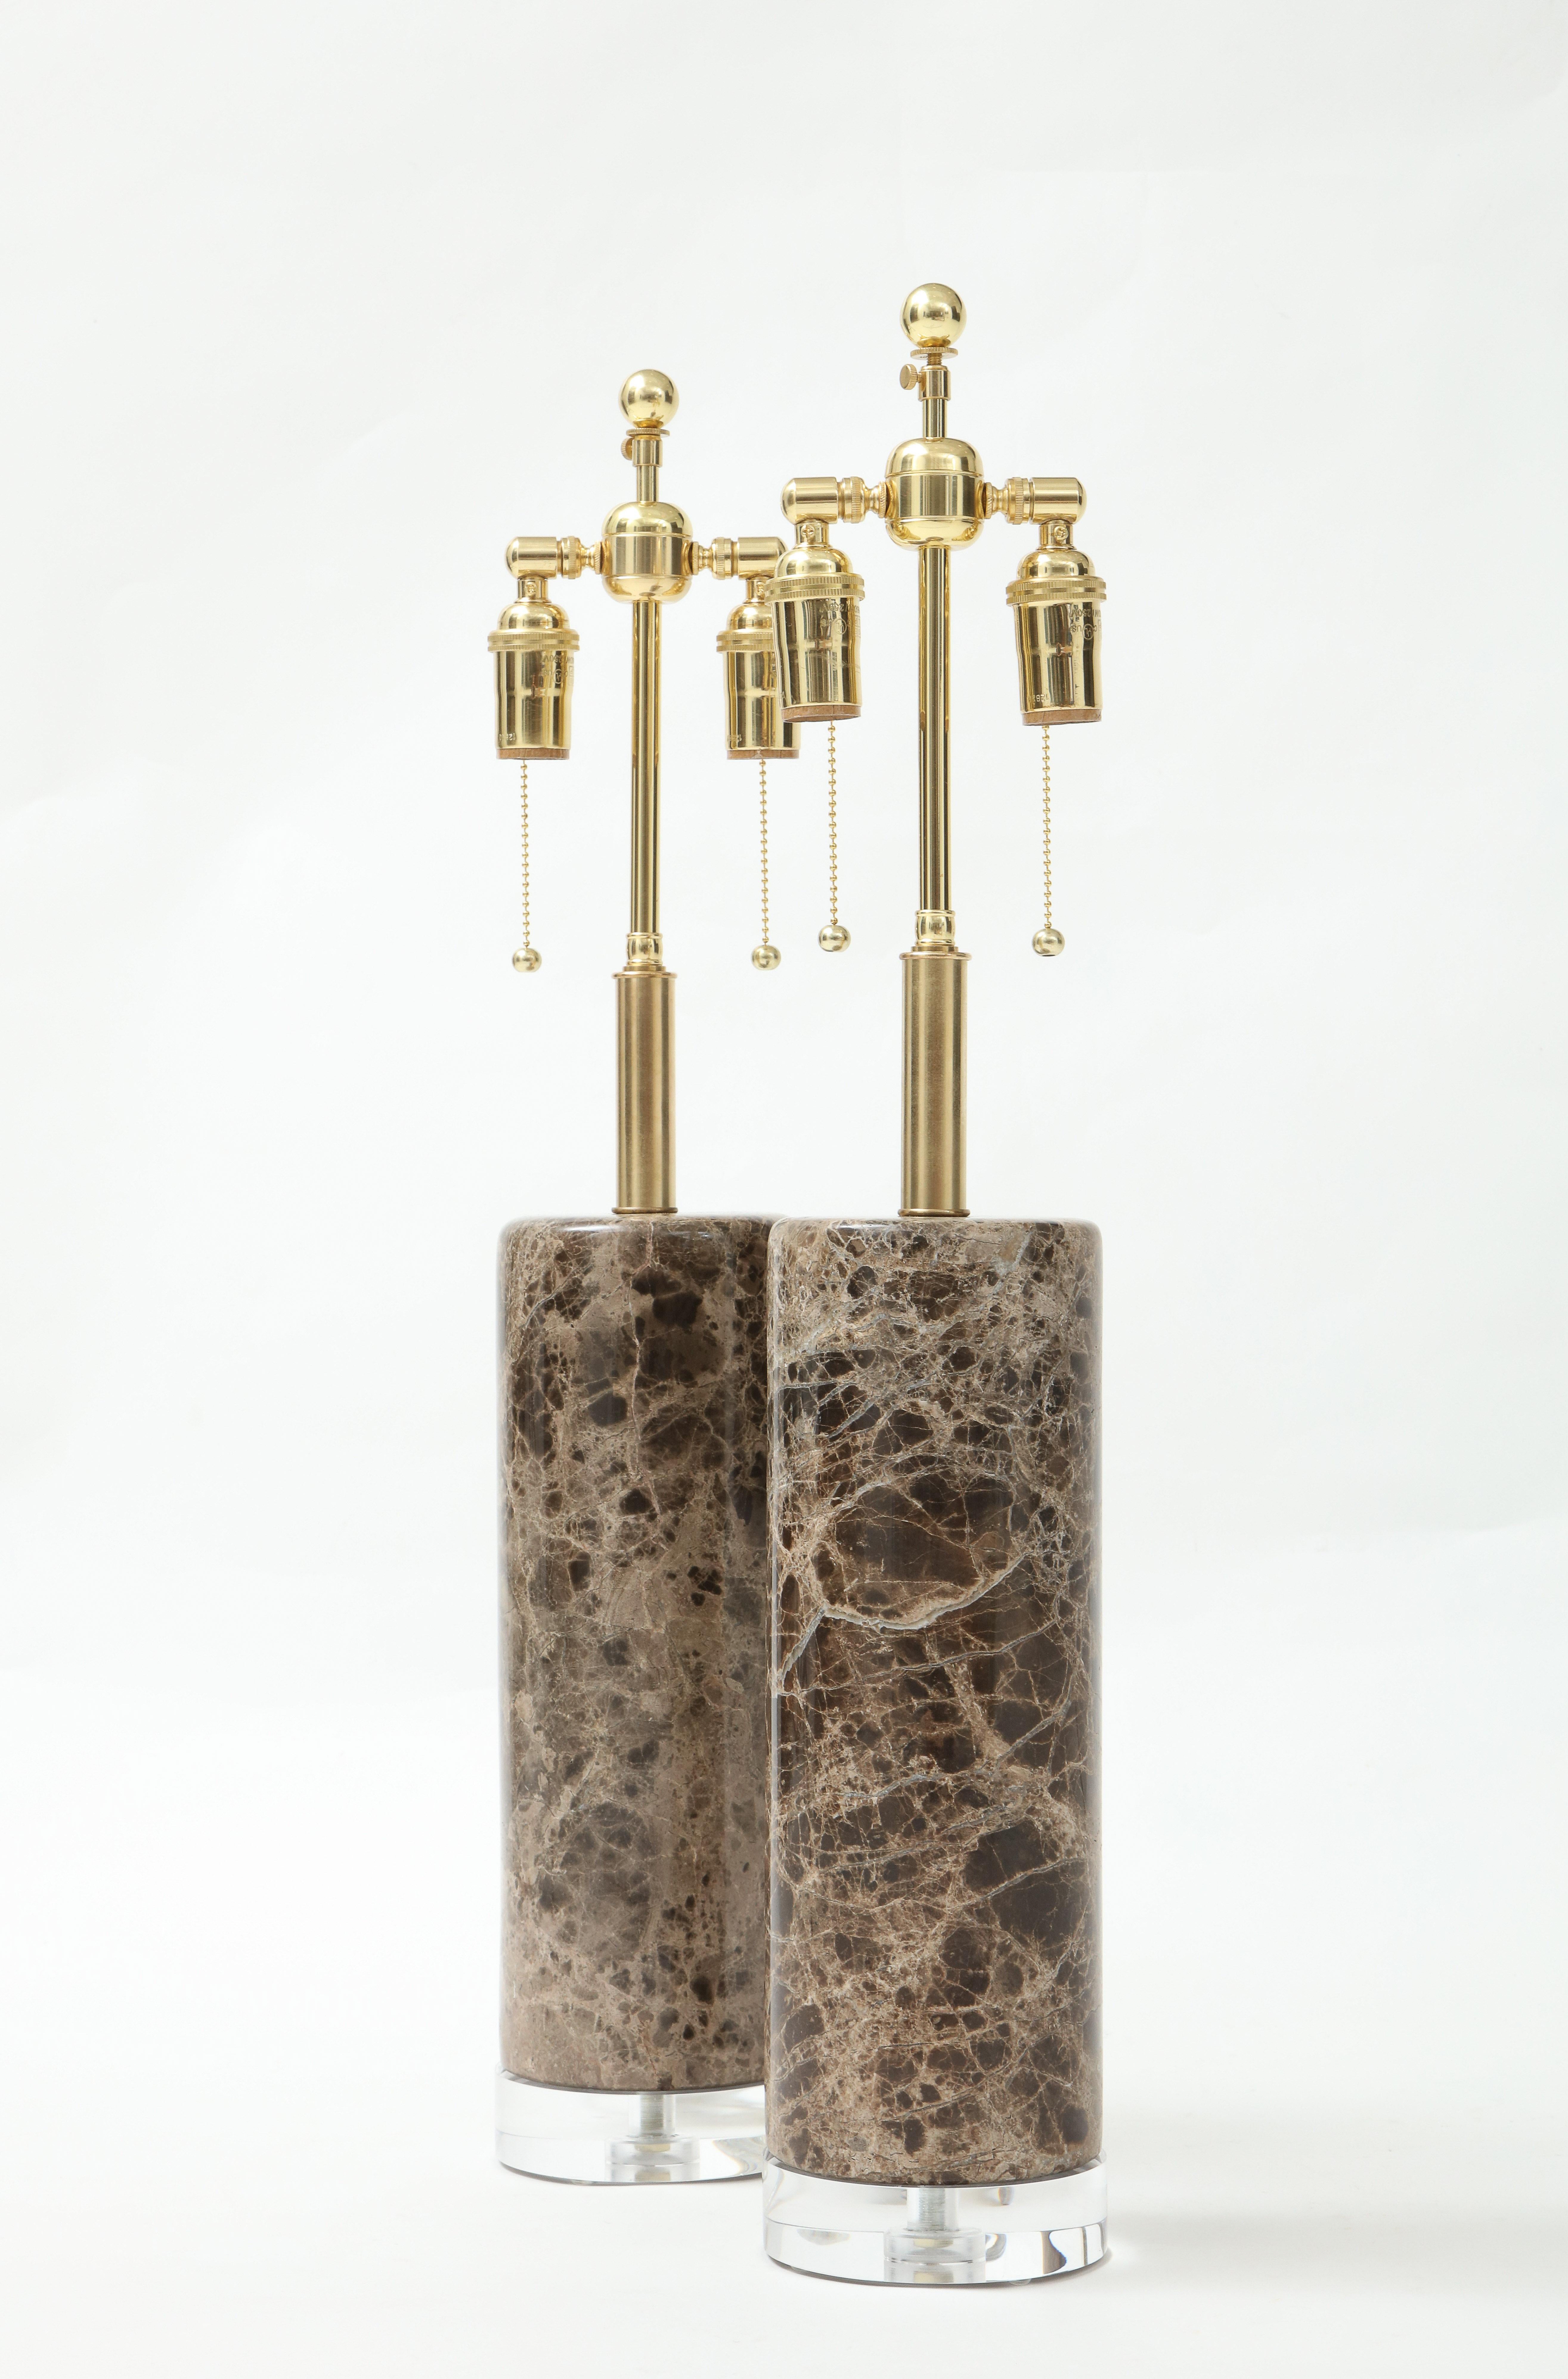 Pair of cylindrical marble lamps that sit on thick lucite bases.
The lamps have been newly rewired with adjustable polished brass double clusters.